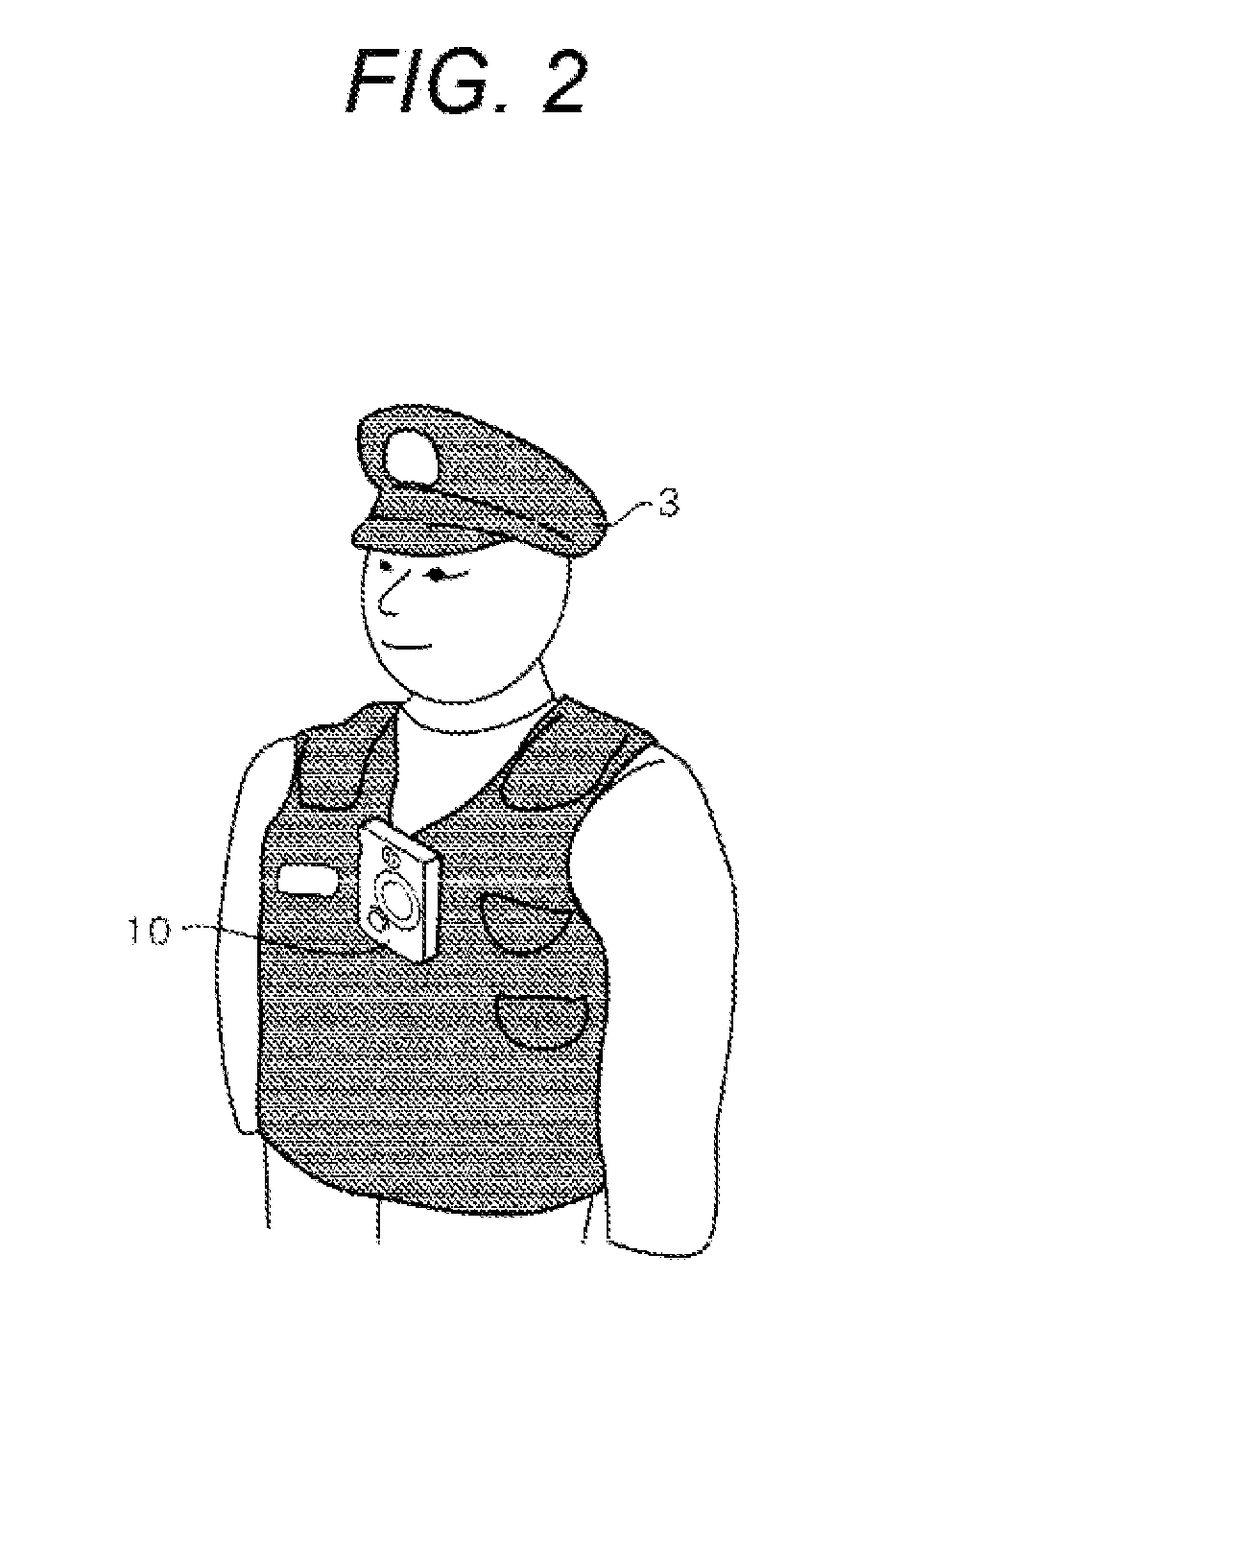 Wearable camera system and recording control method